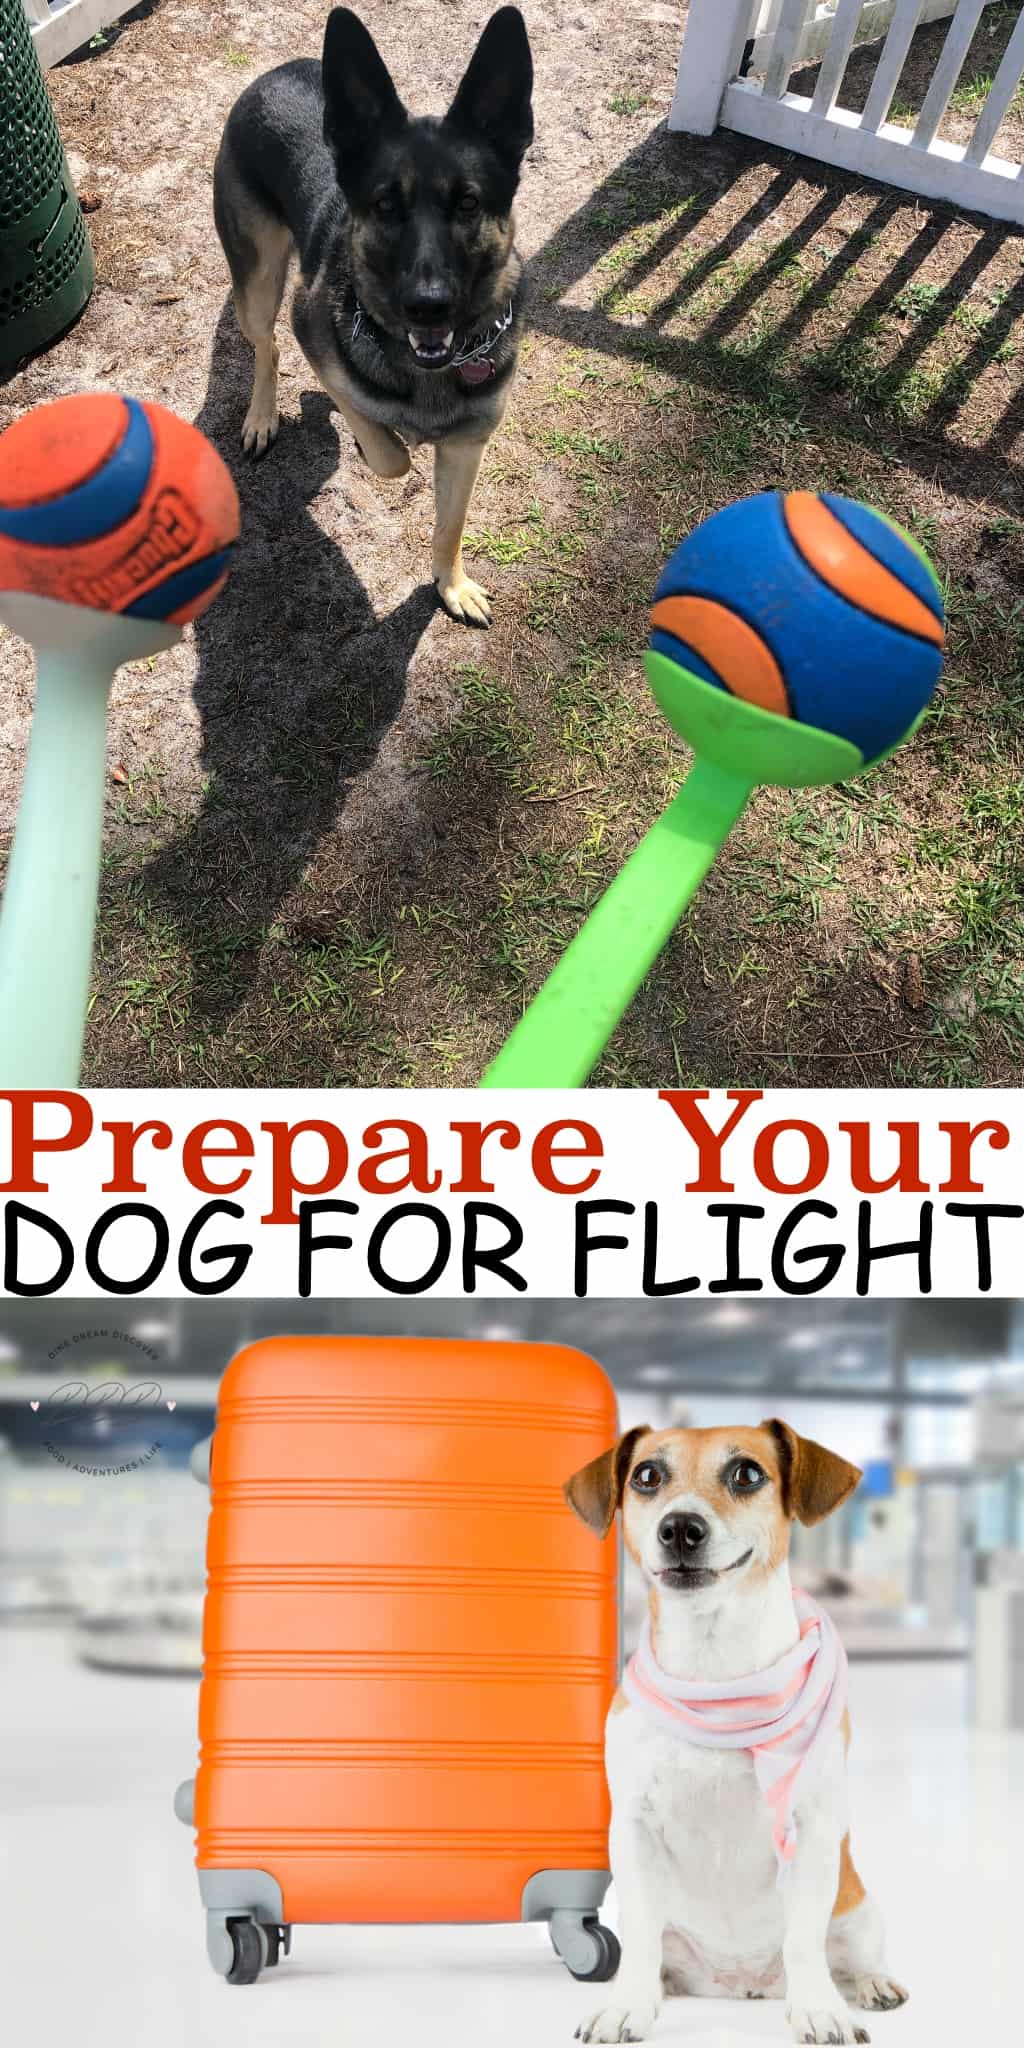 Dogs of all shapes and sizes can fly with different airlines to pet-friendly destinations all around the world. Learn how to prepare your dog for flight.